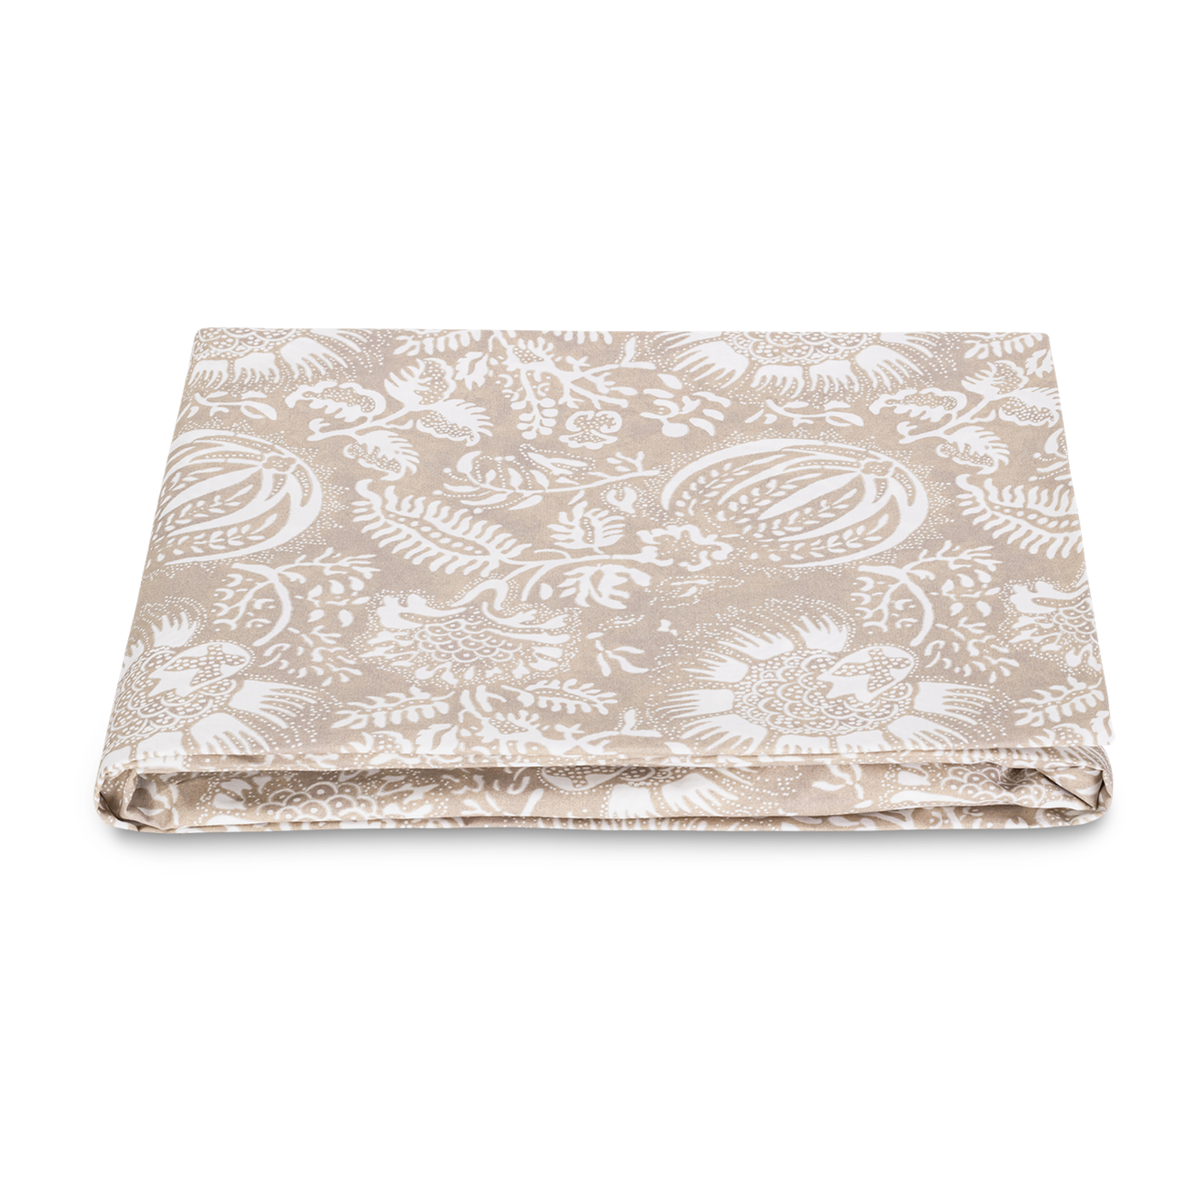 Folded Fitted Sheet of Matouk Granada Bedding in Dune Color